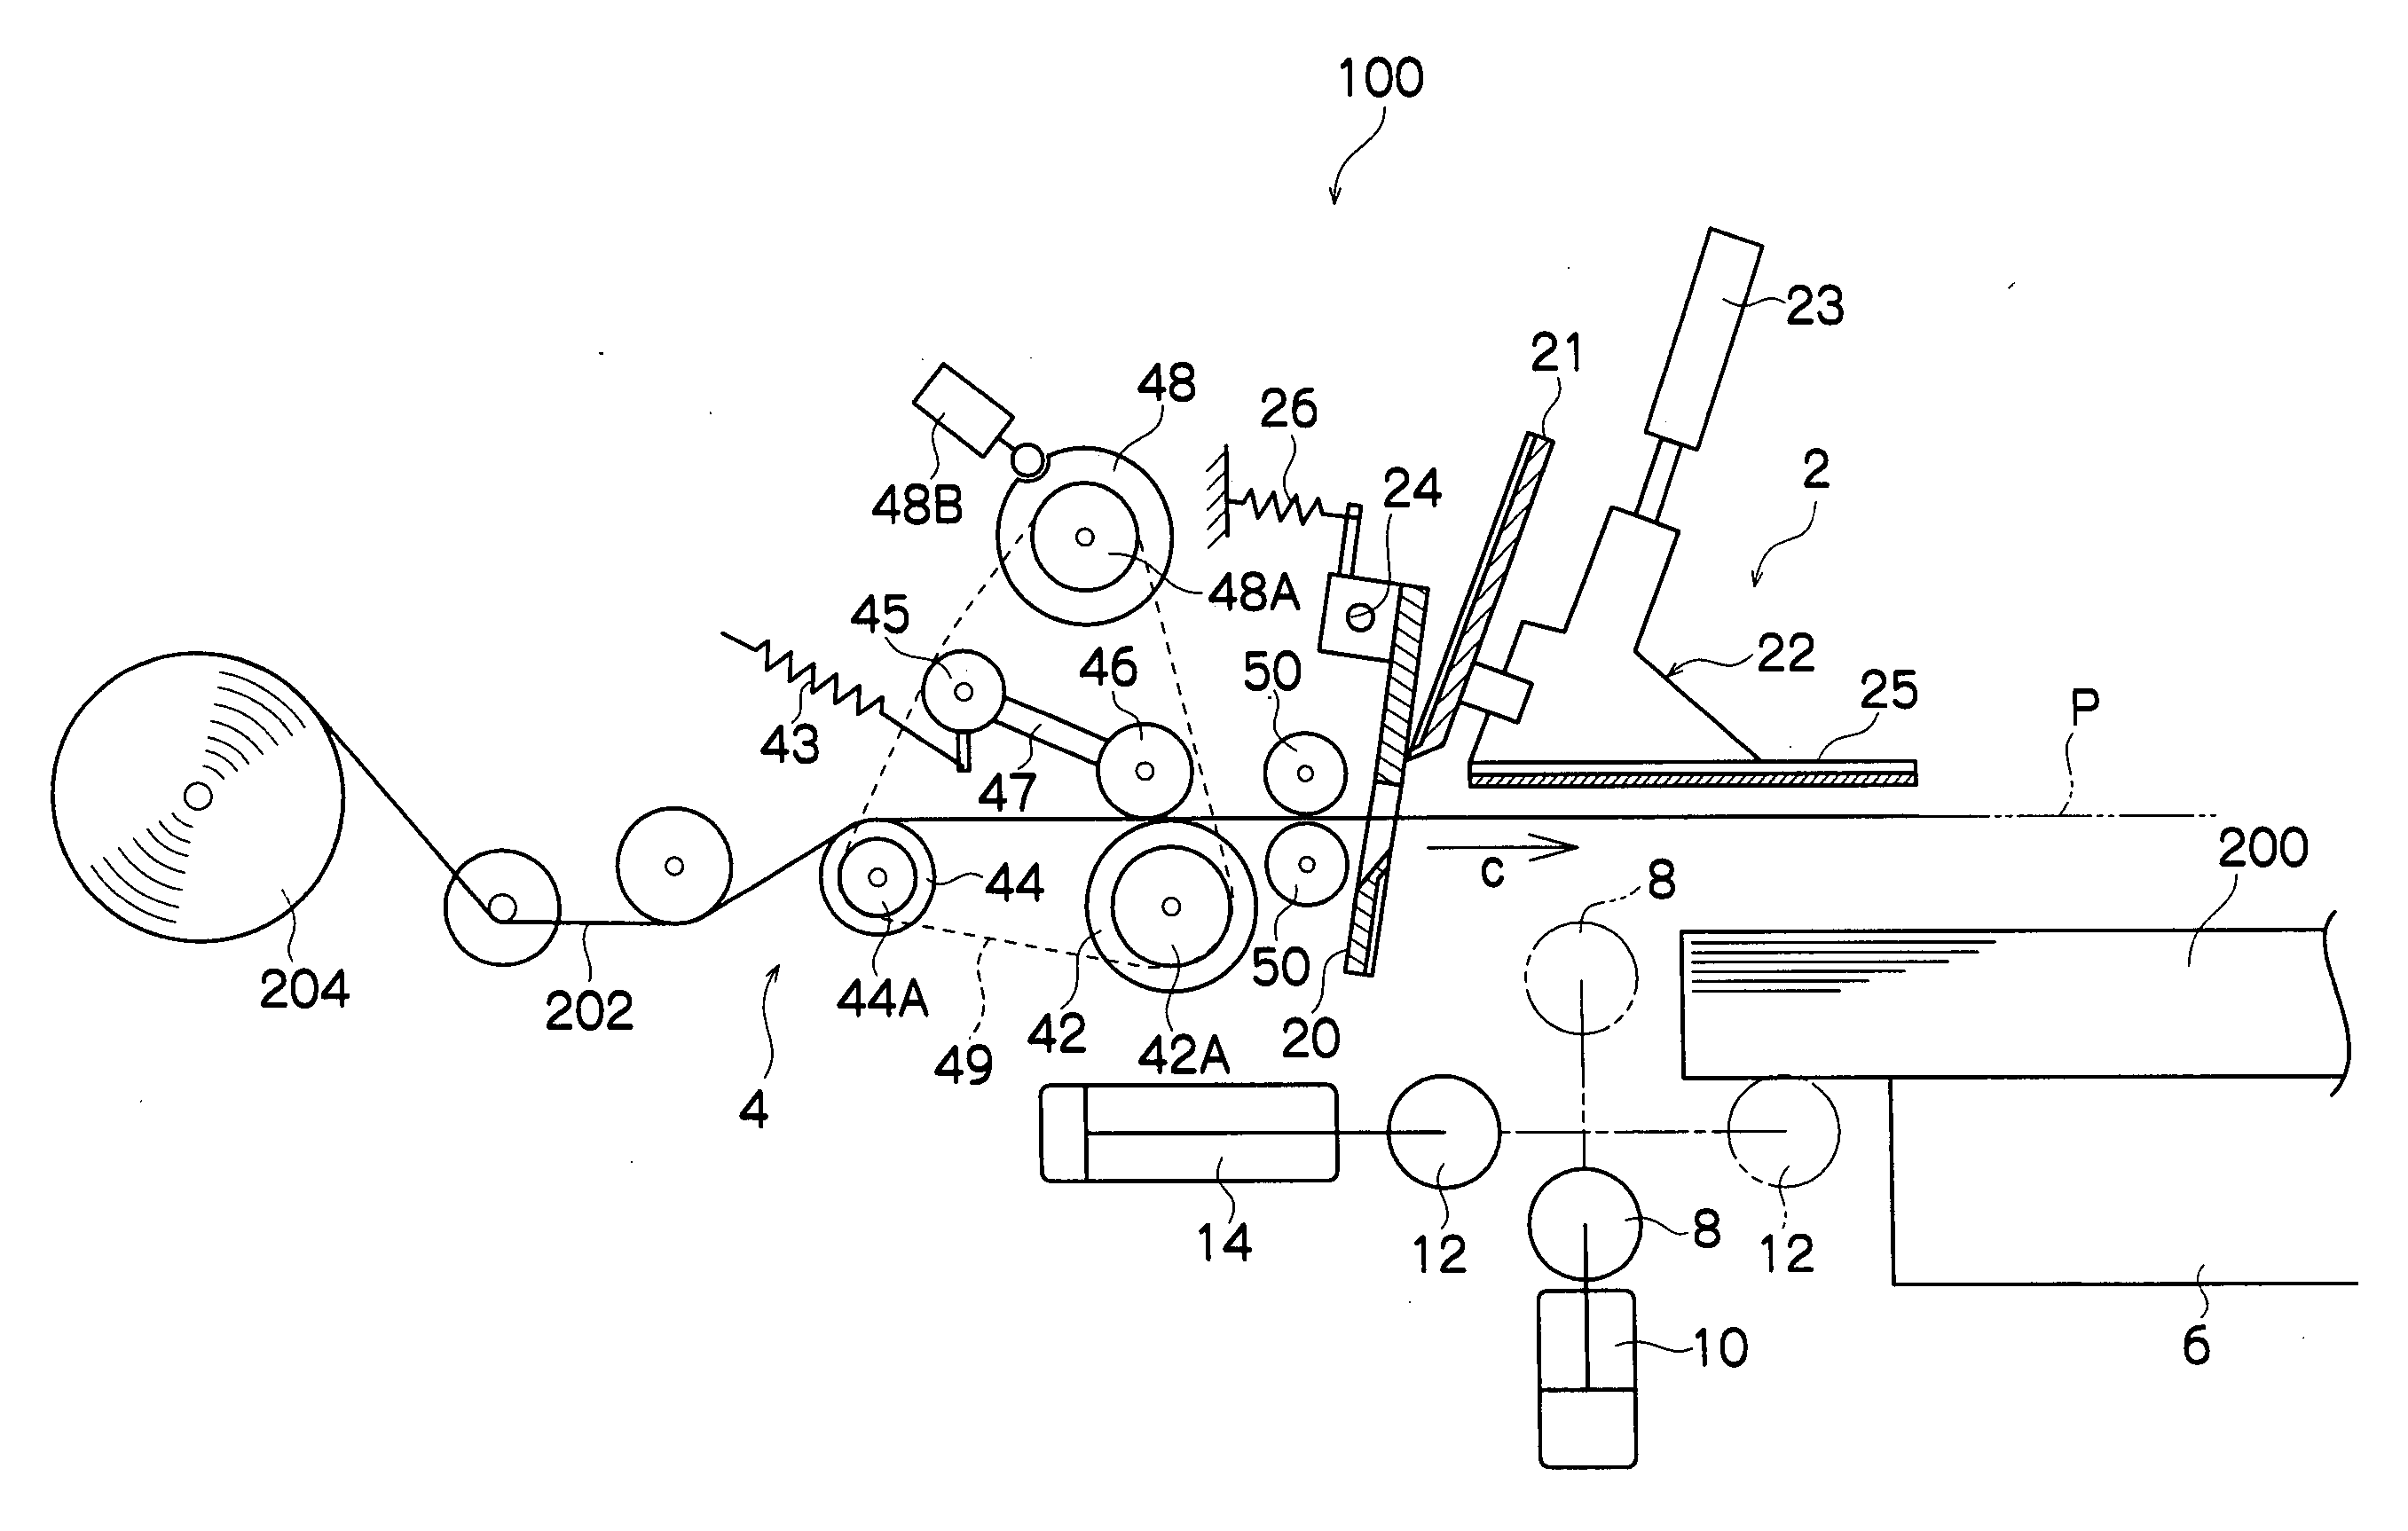 Guillotine cutter and tape affixing apparatus